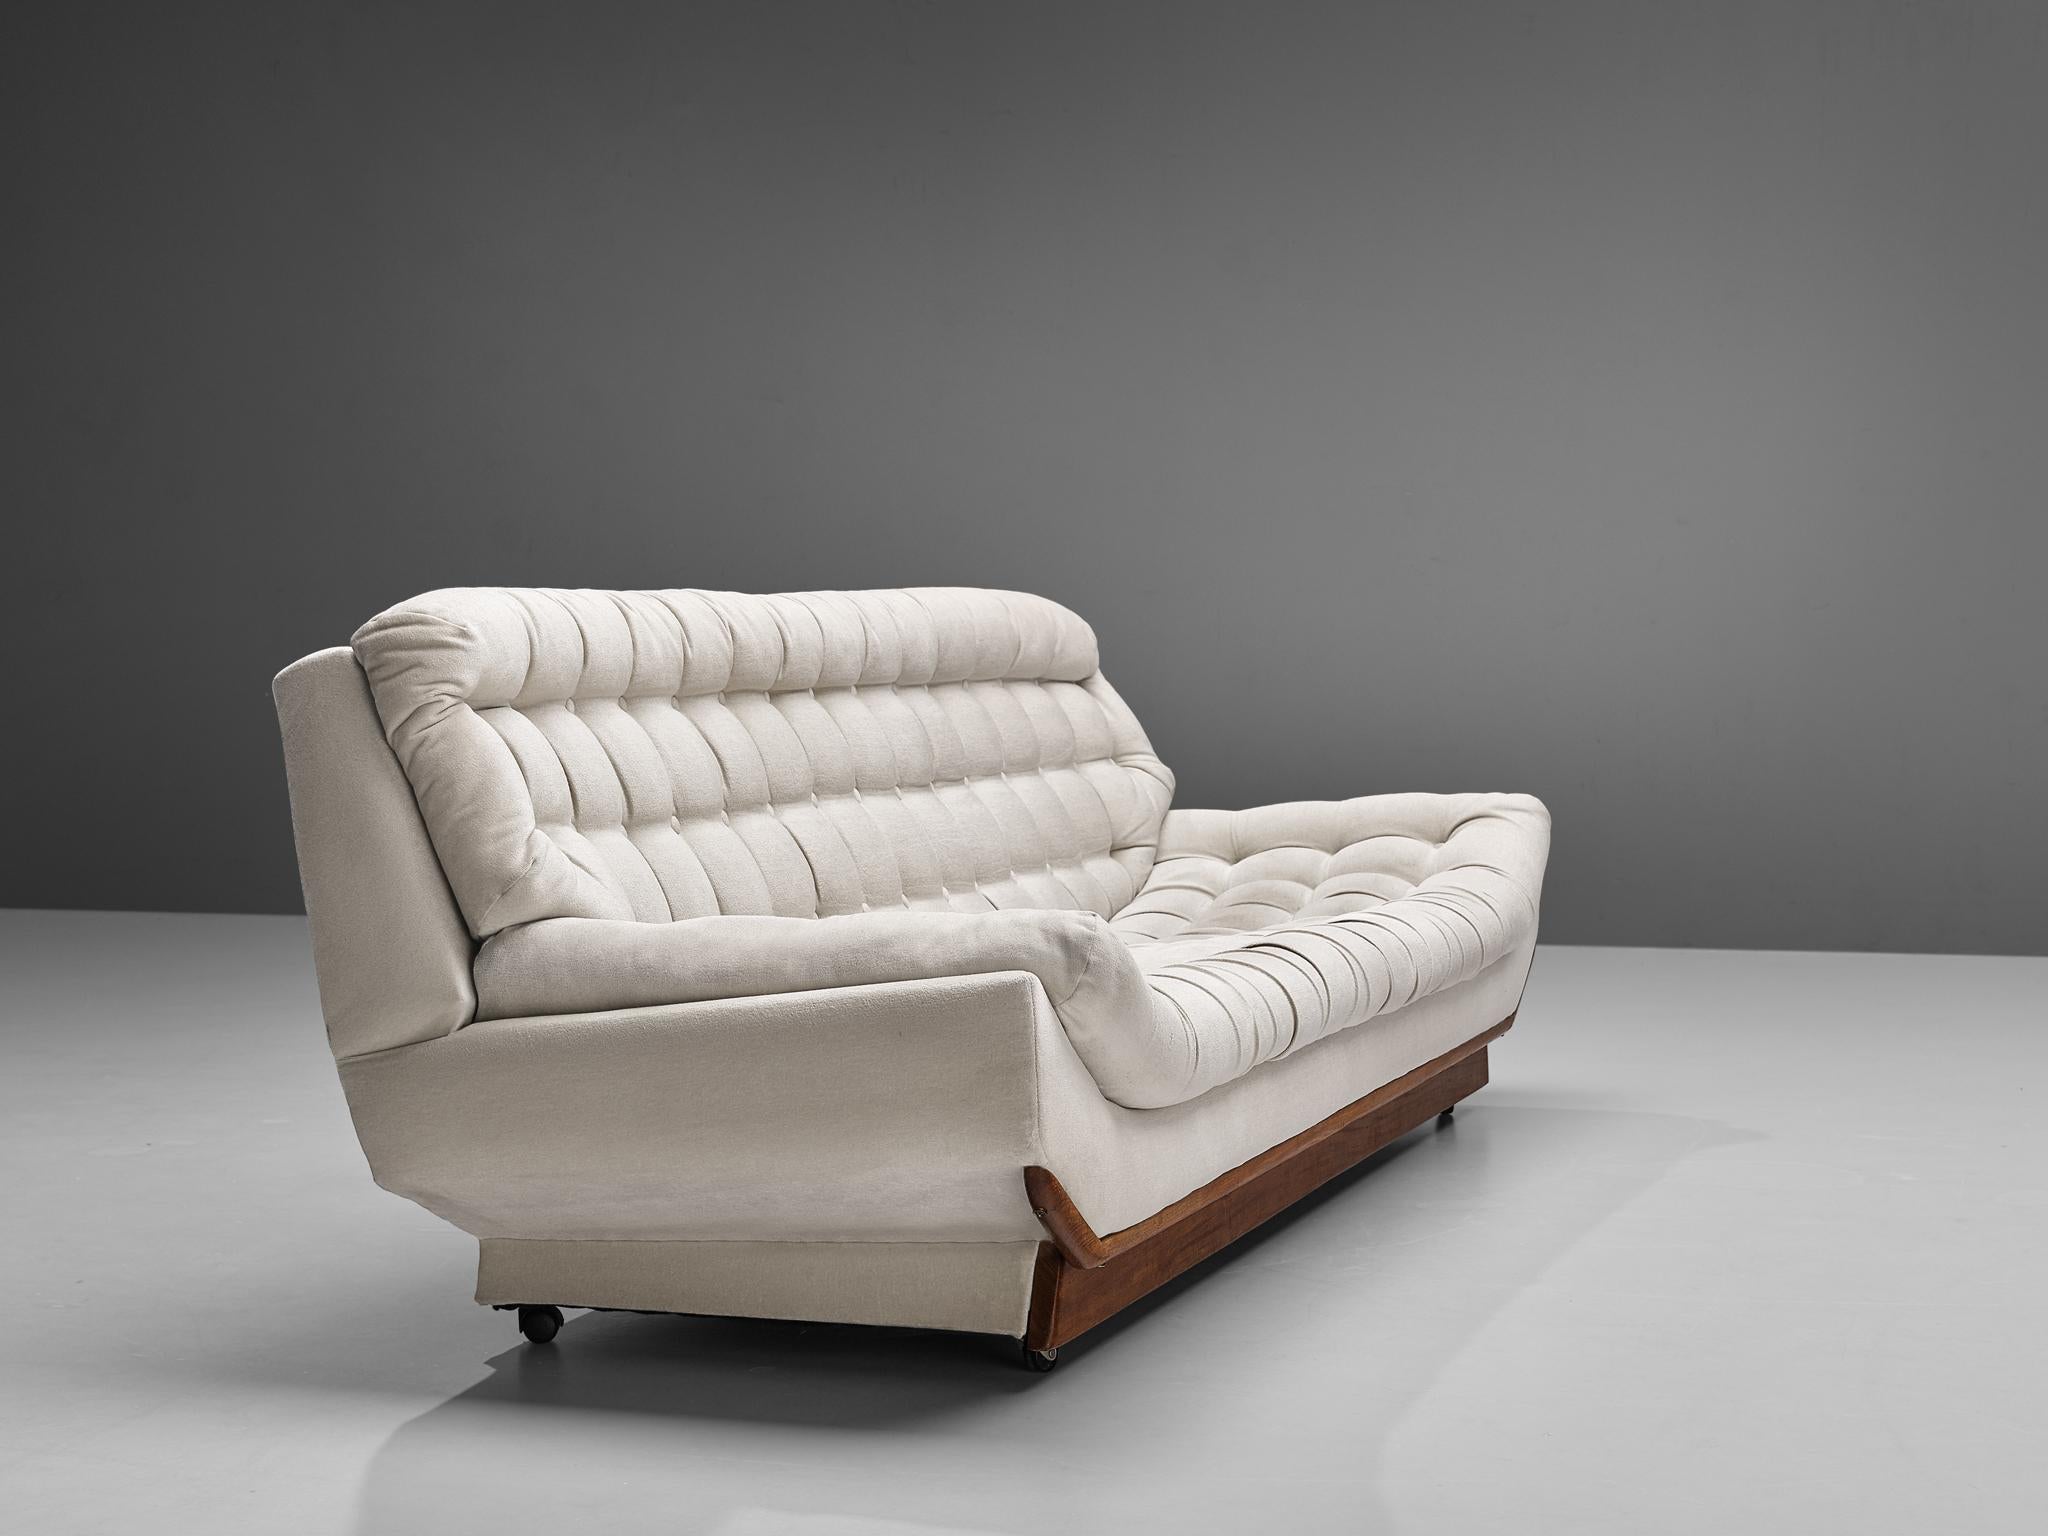 Late 20th Century Italian Sofa with White Tufted Upholstery